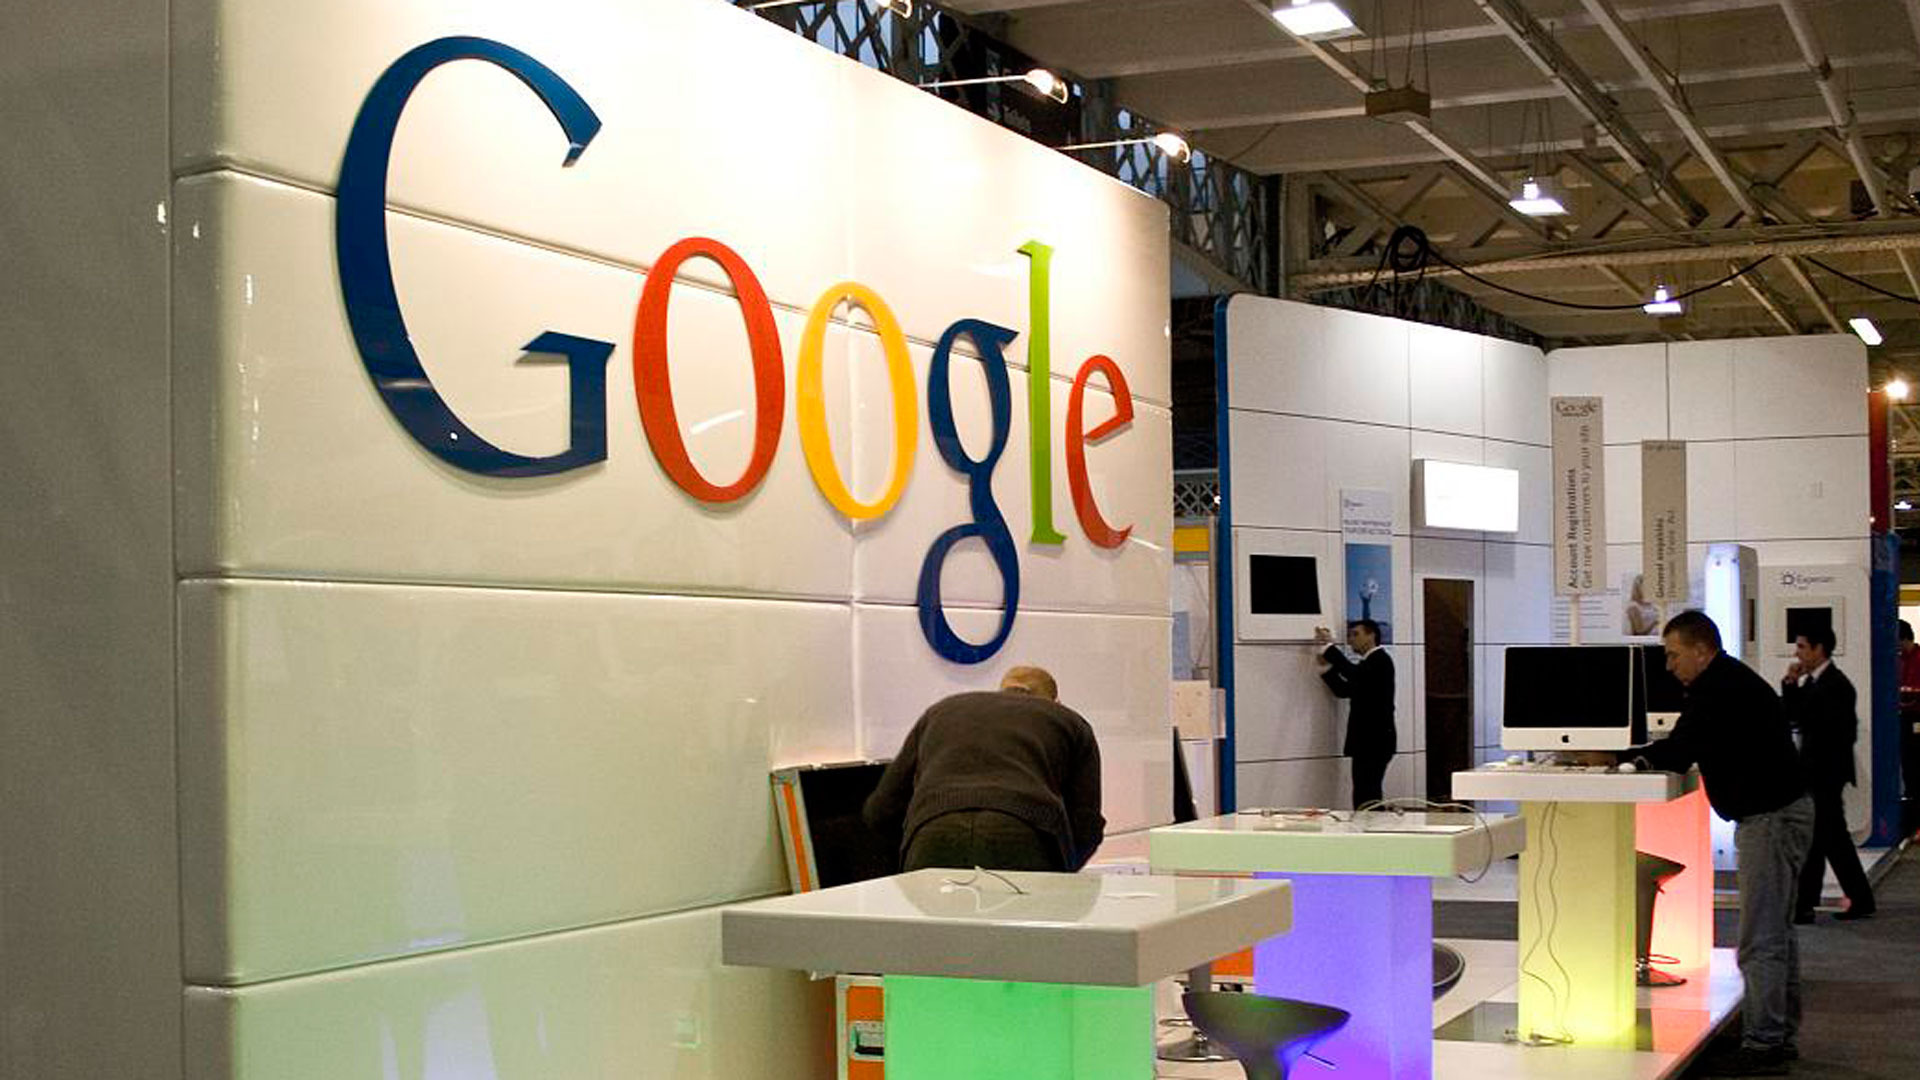 Google’s CEO encourages employees to return to work in the office.